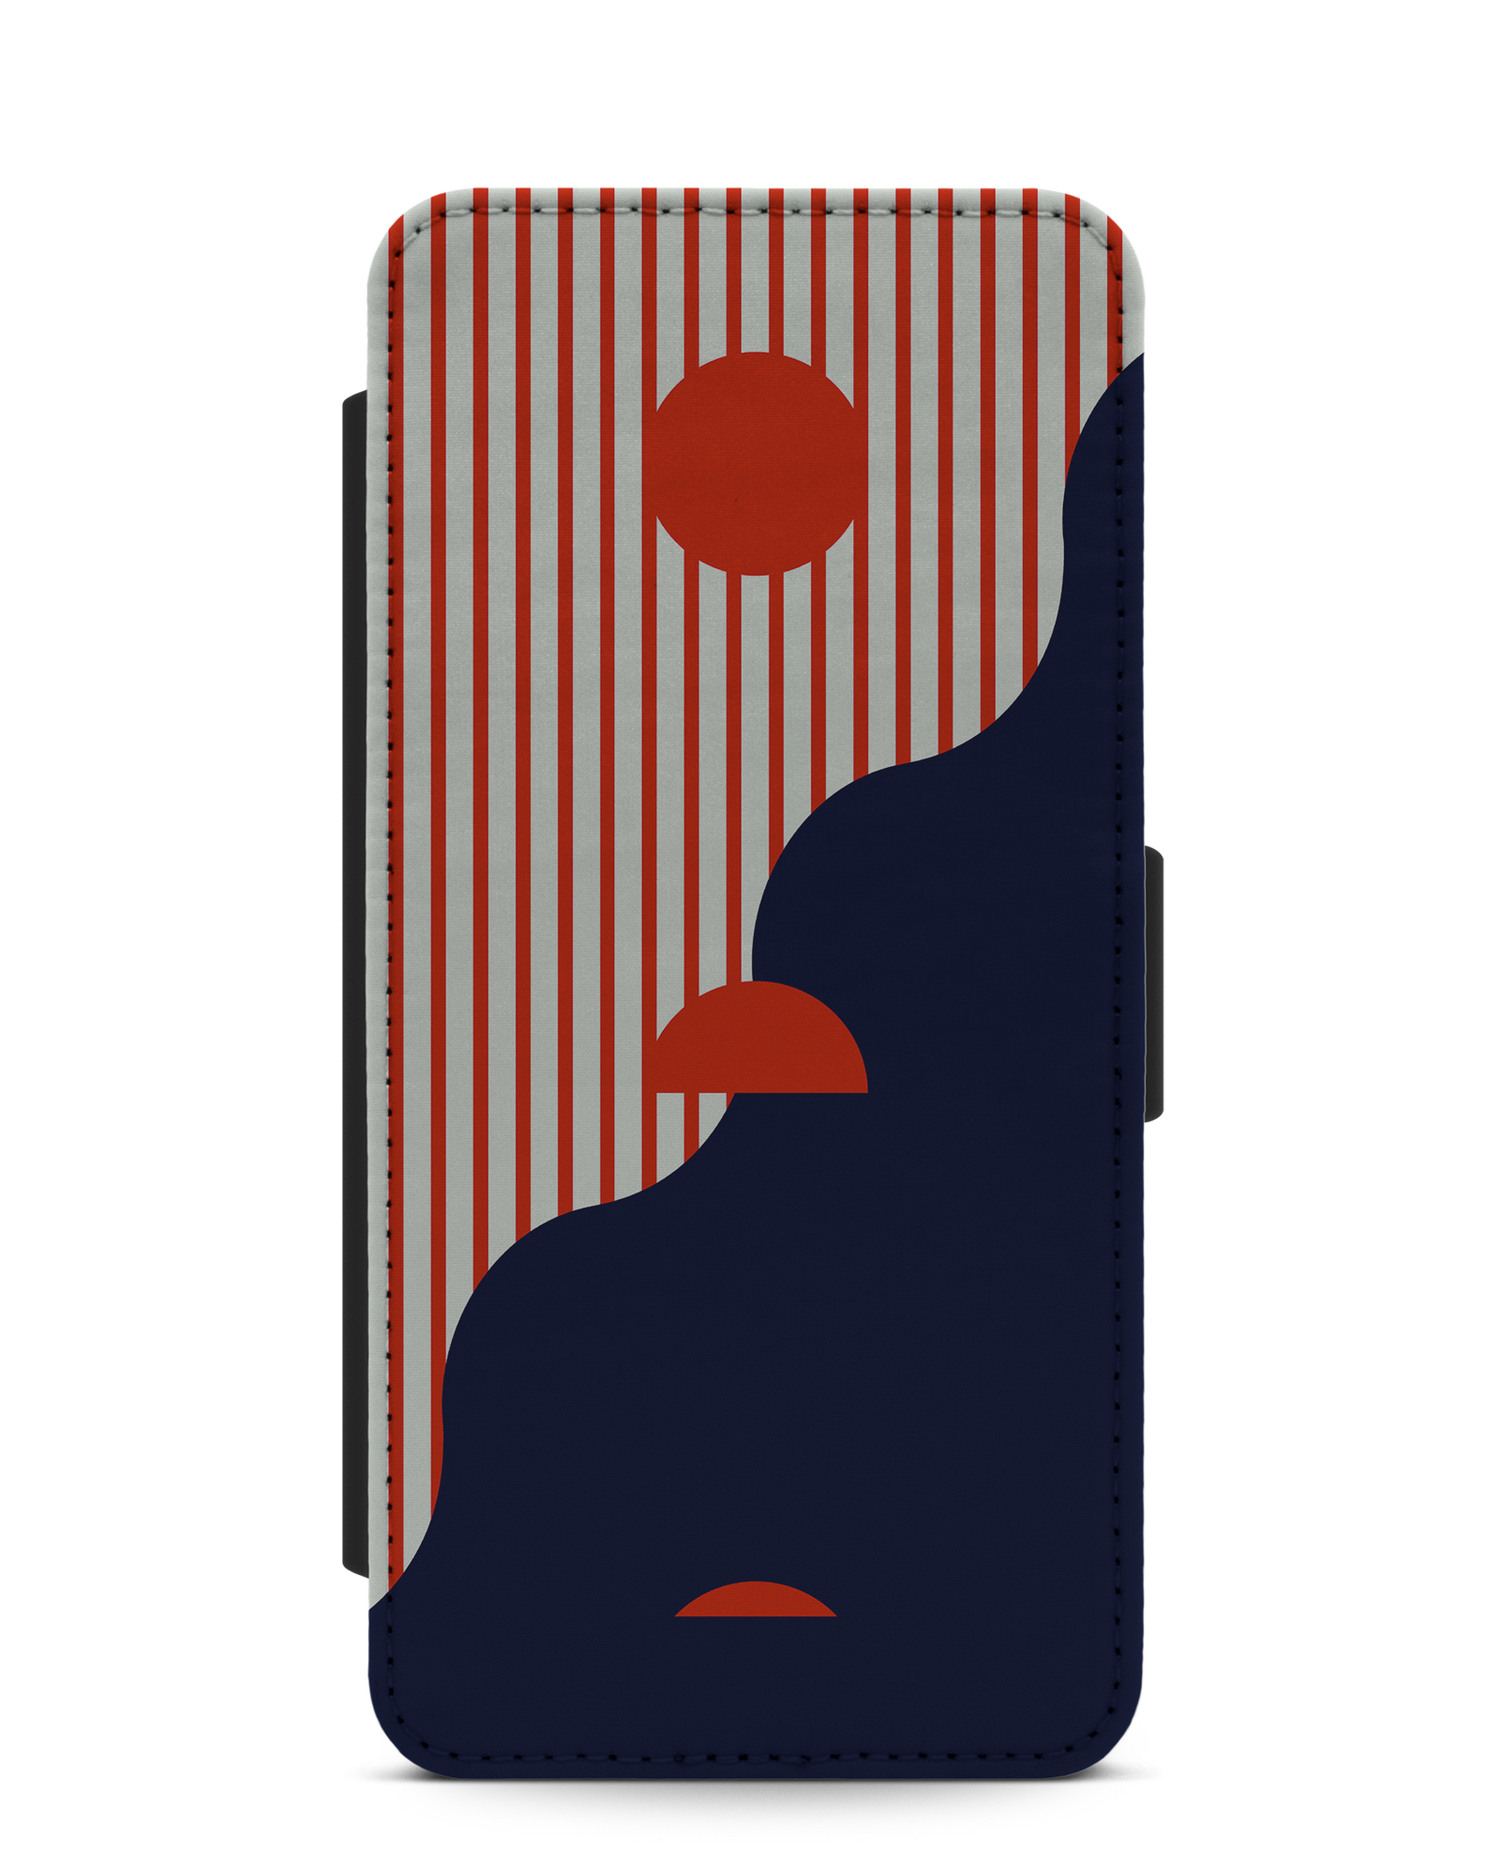 Metric Sunset Wallet Phone Case Huawei P30 Pro: Front View